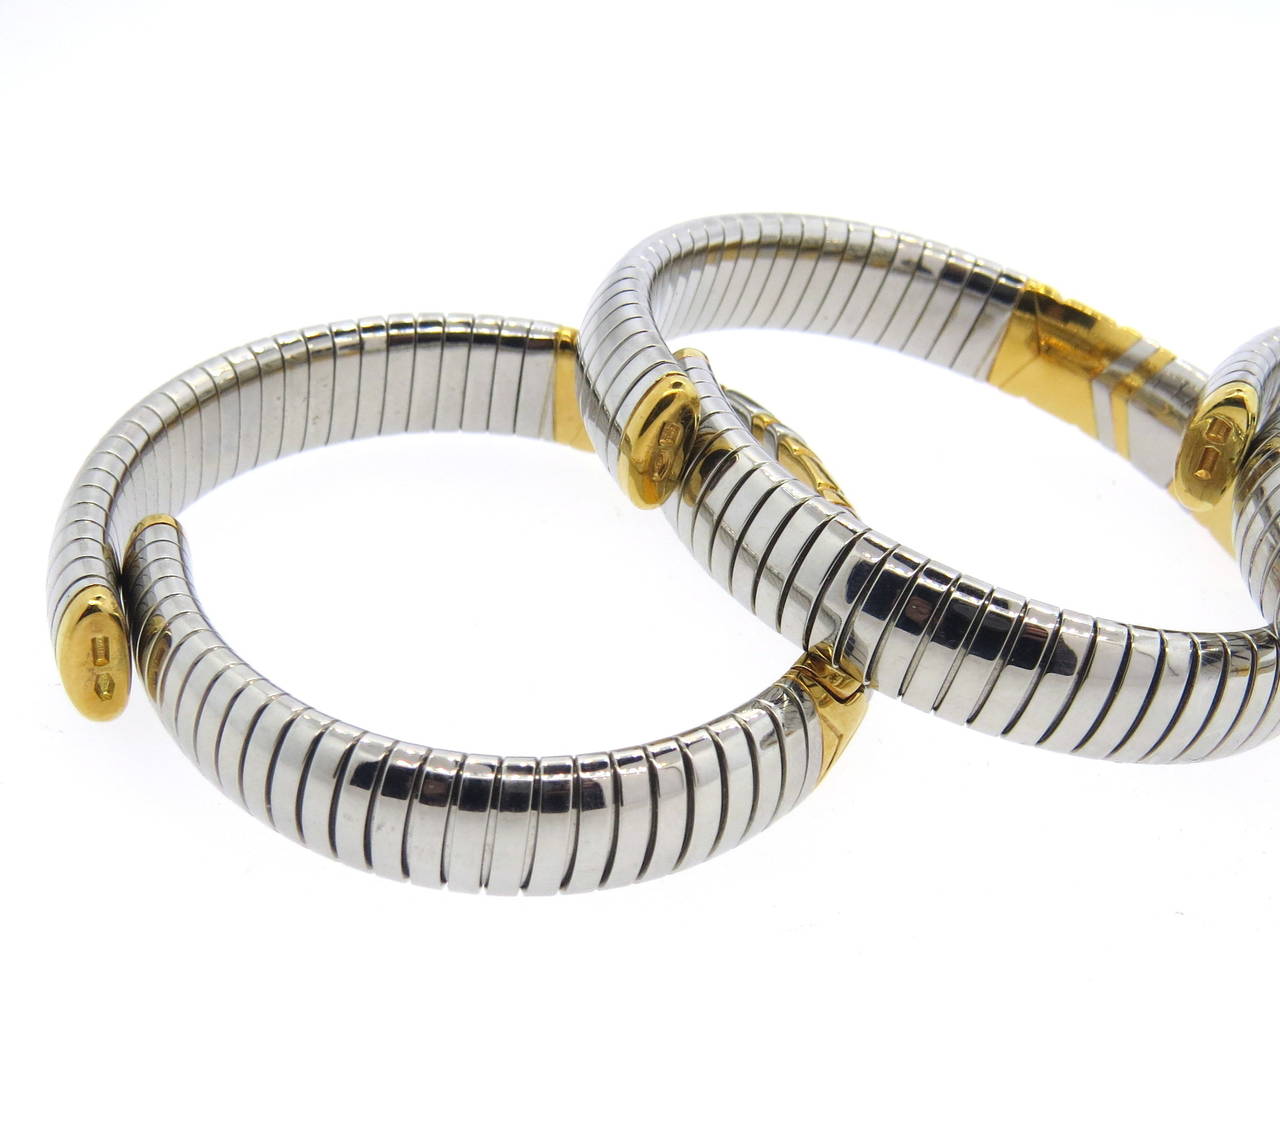 Set of three Bulgari 18k yellow gold and steel bracelets from Parentesi collection. Each bracelet will comfortably fit up to 6 3/4